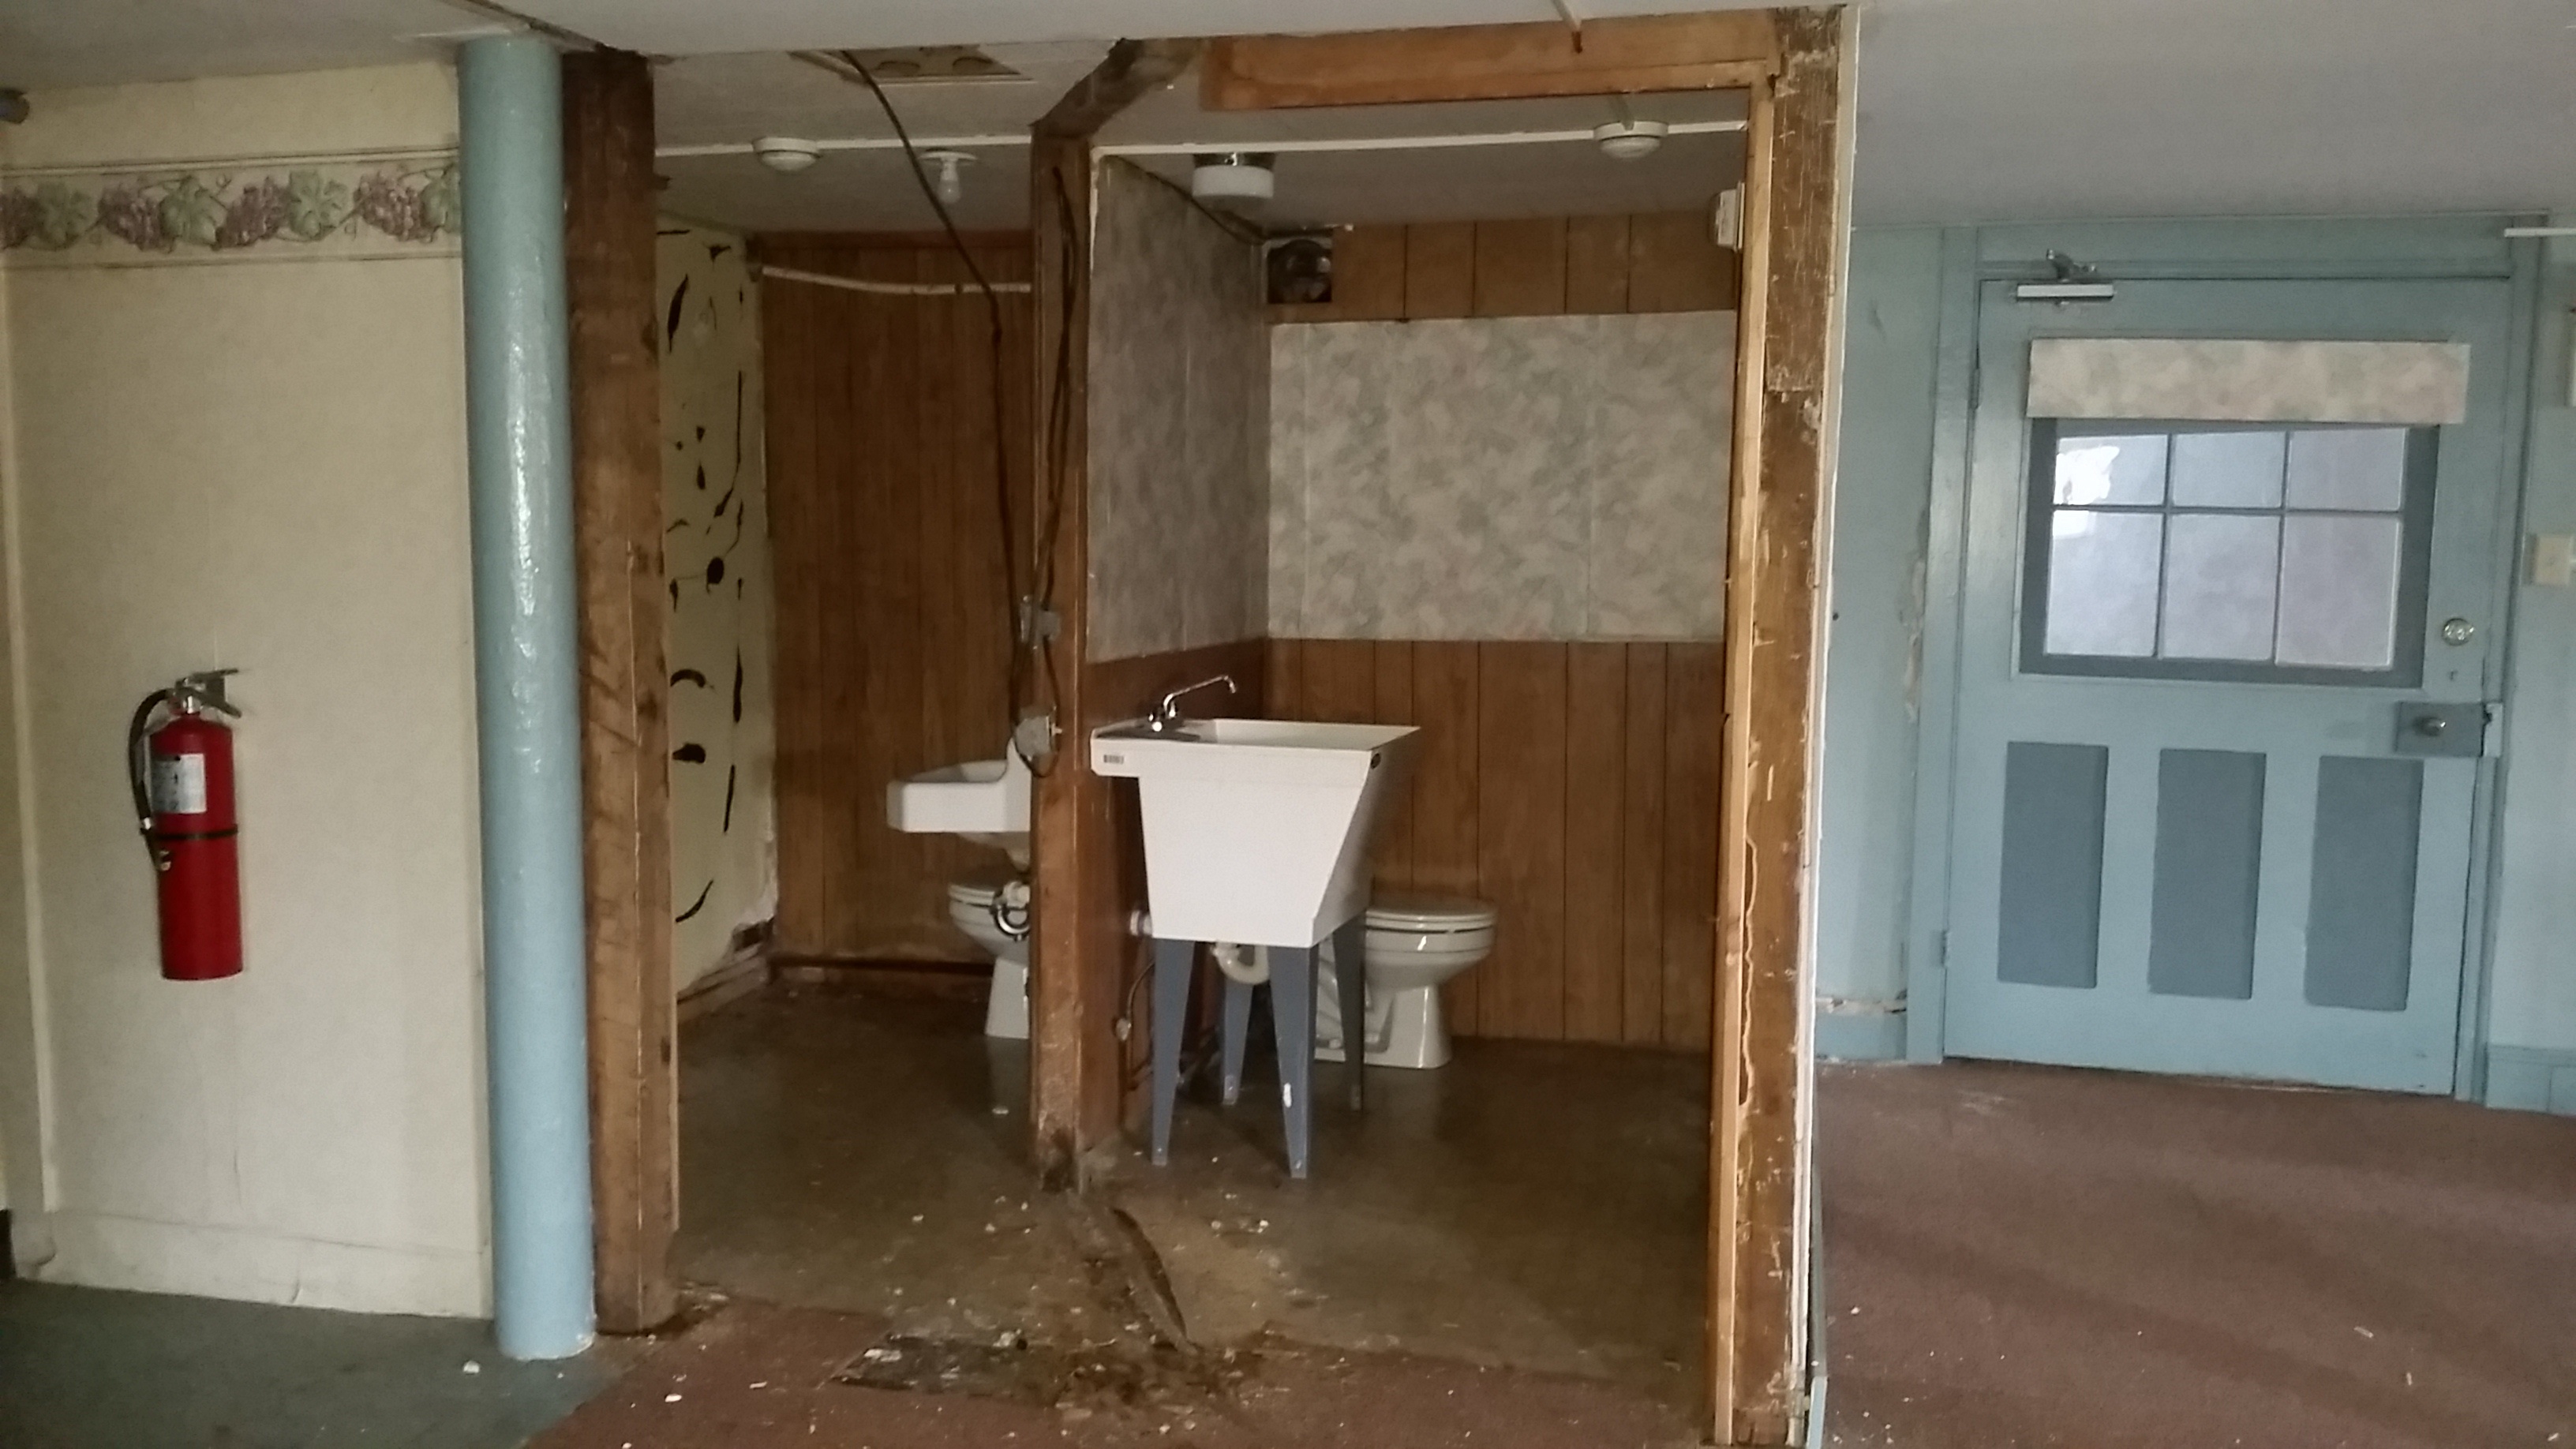 August 3_2018_Restroom_connecting_wall_removed